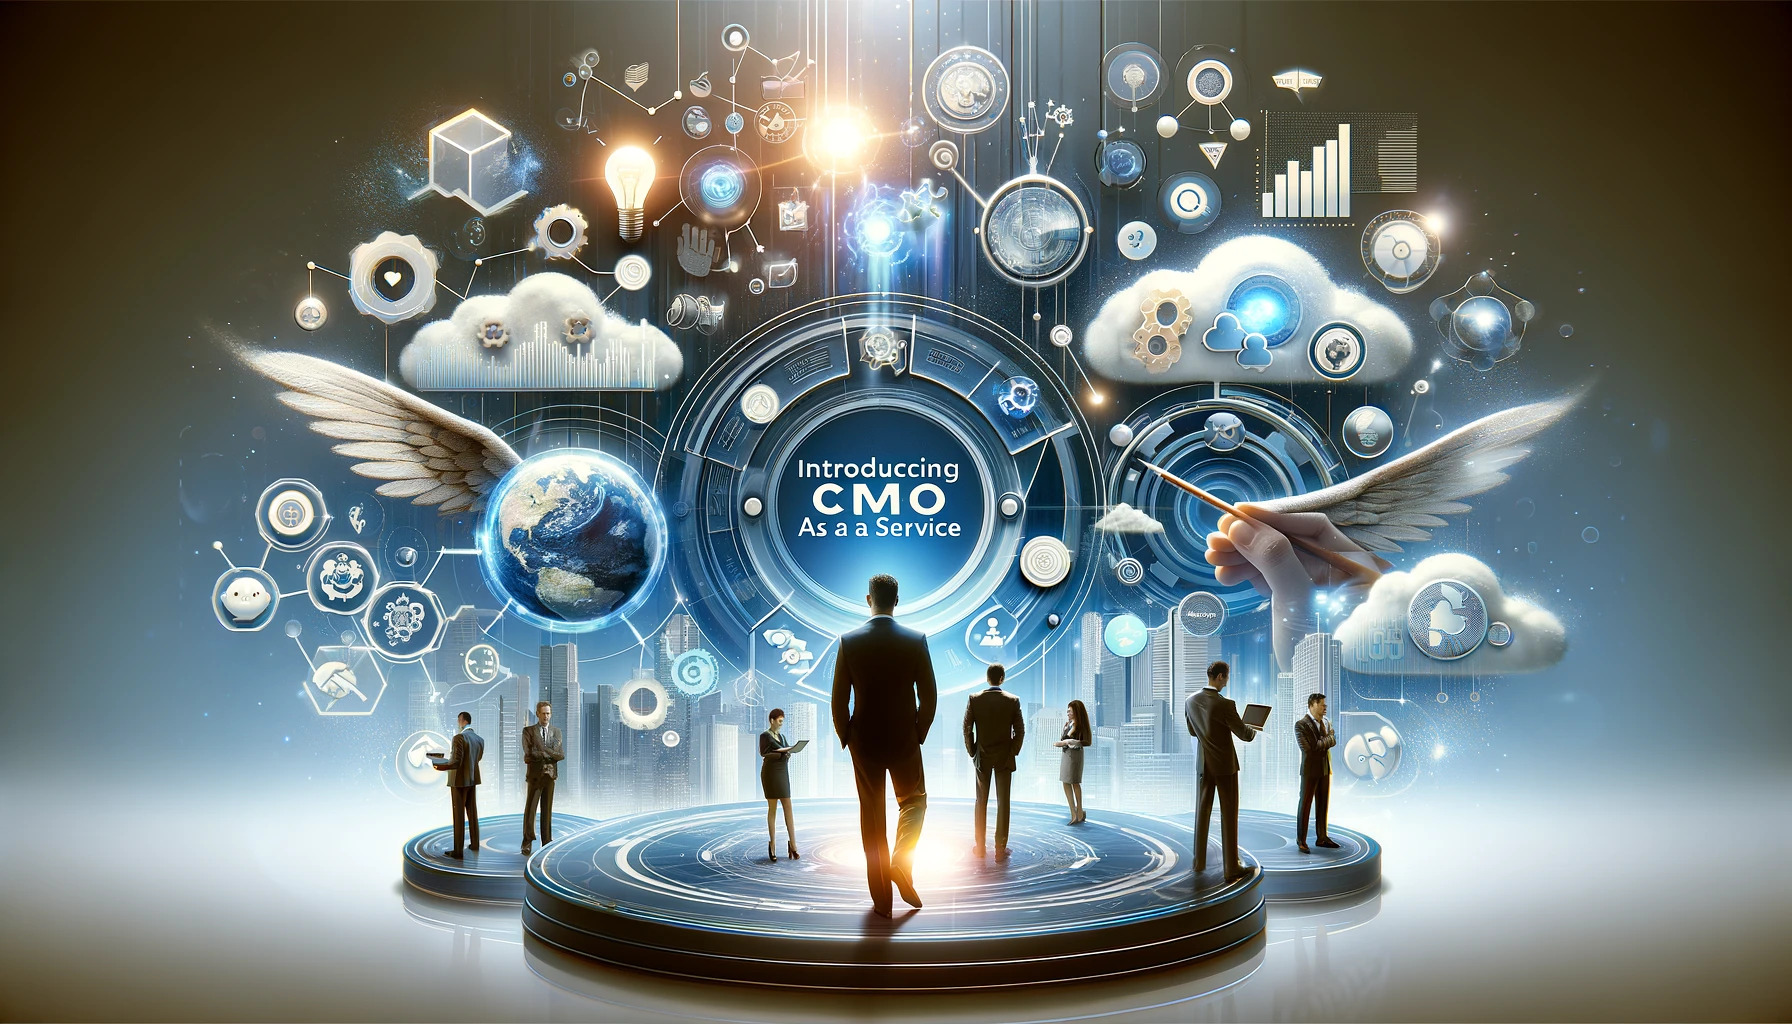 Drawing Inspiration from the Brazilian Market: Introducing CMO as a Service